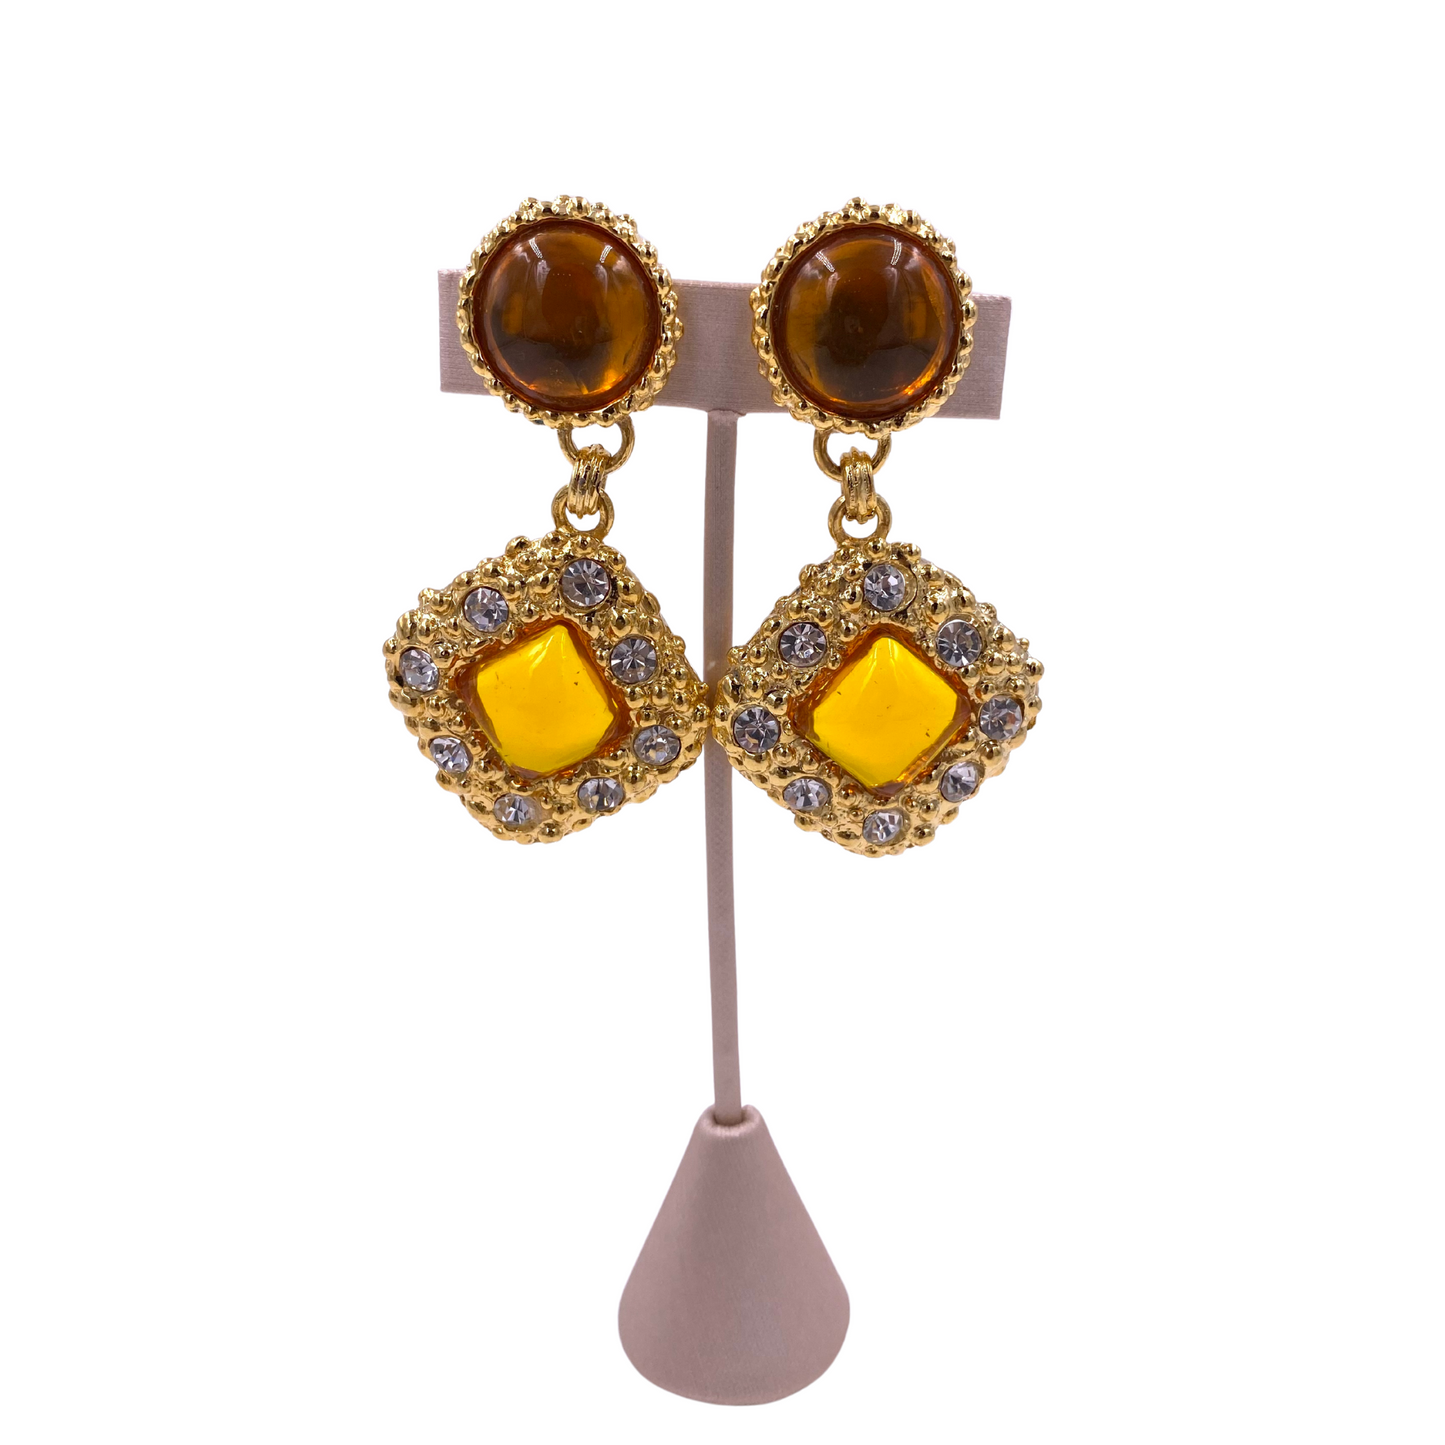 French Citrine Colored Drop Earrings with Crystals